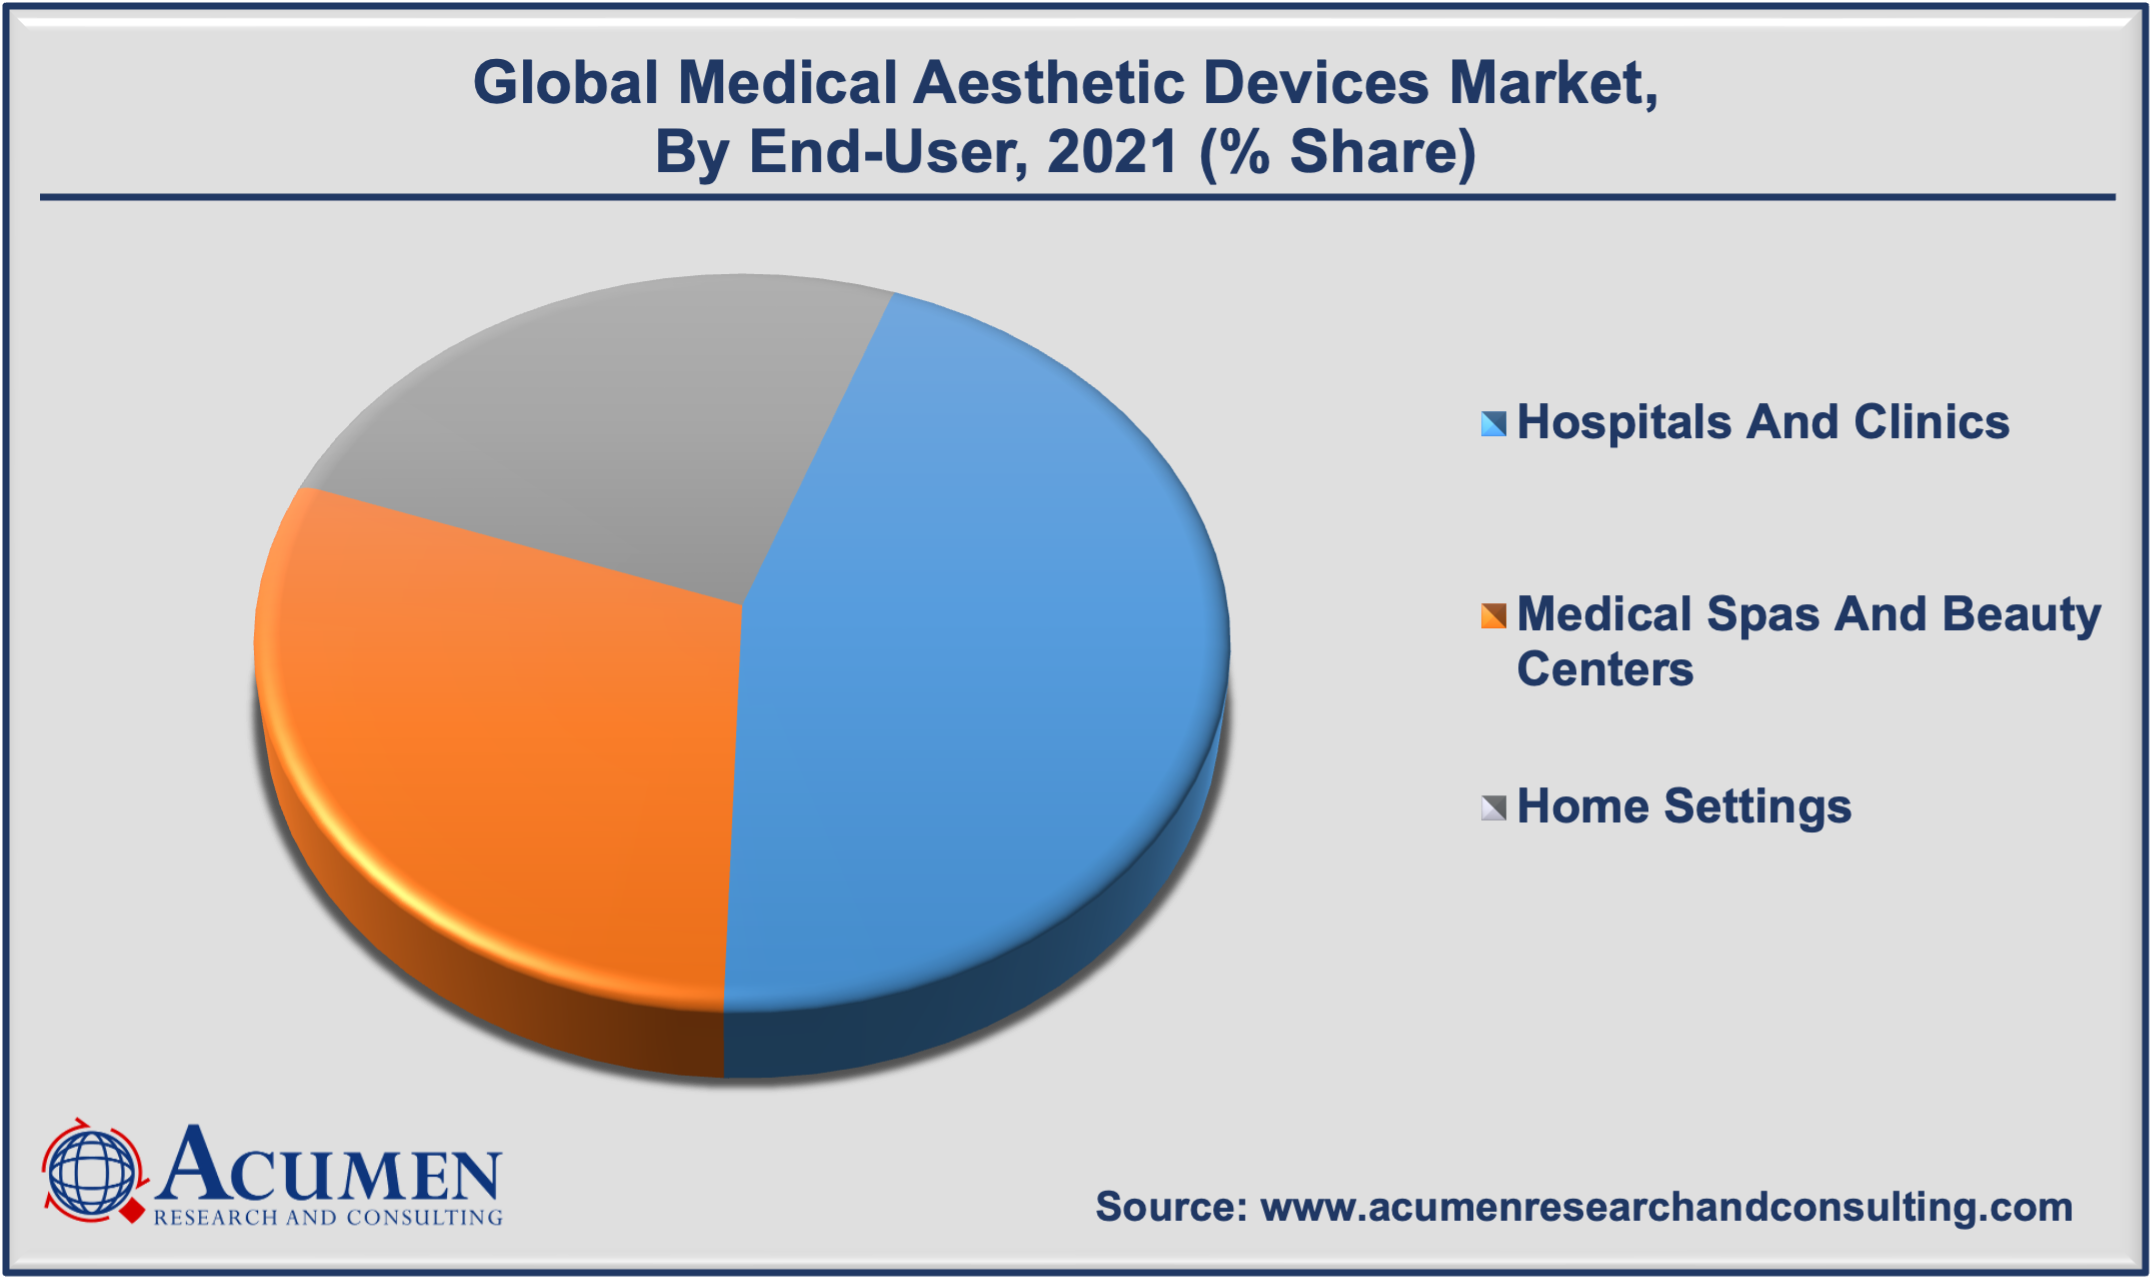 Medical Aesthetic Devices Market Analysis accounted for USD 14,980 Million in 2021 and is estimated to reach USD 36,341 Million by 2030.